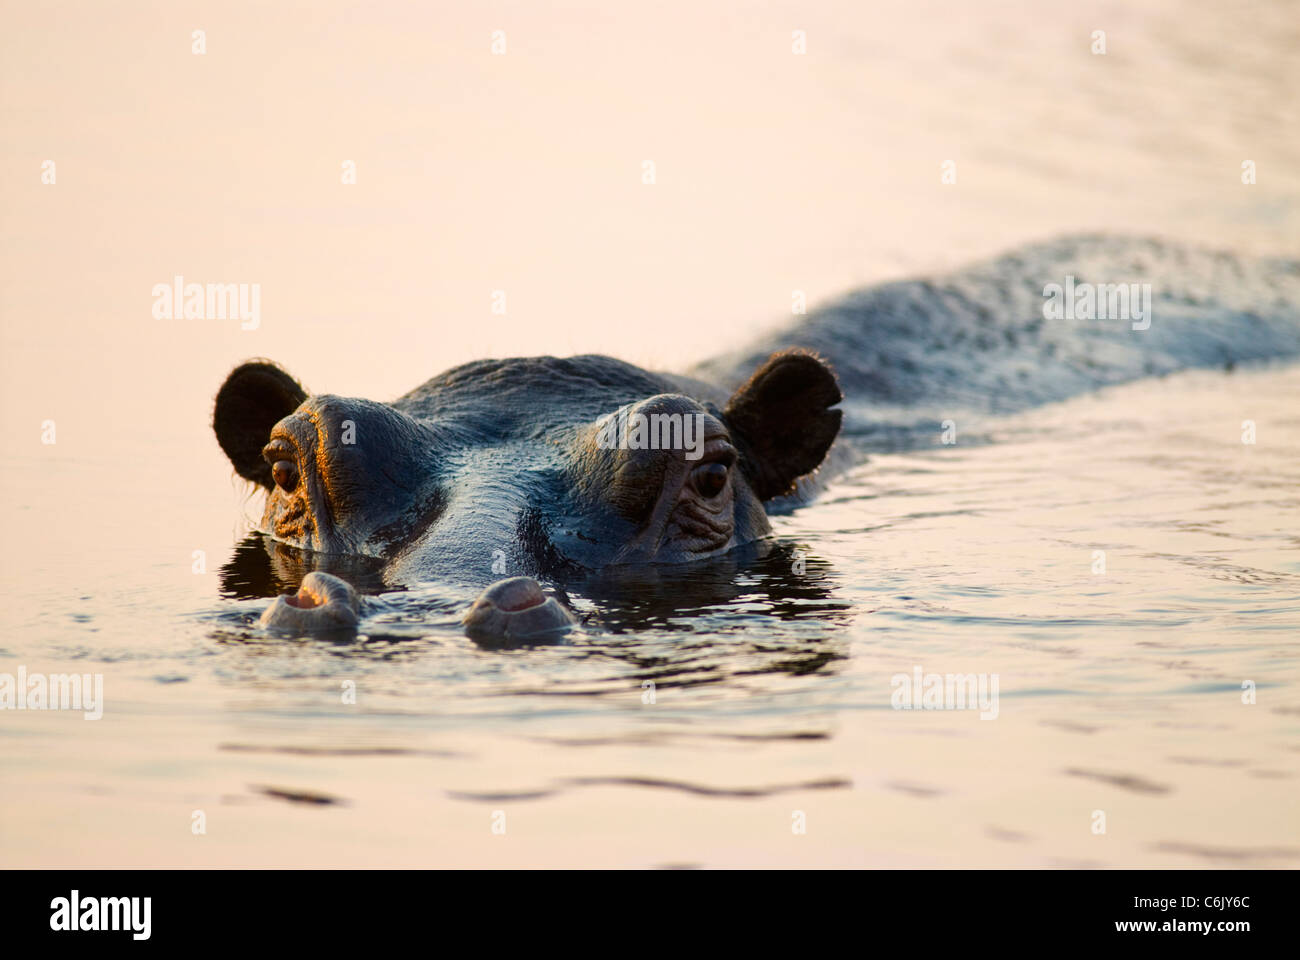 Hippopotamus submerged in water with only eyes and nostrils showing Stock Photo